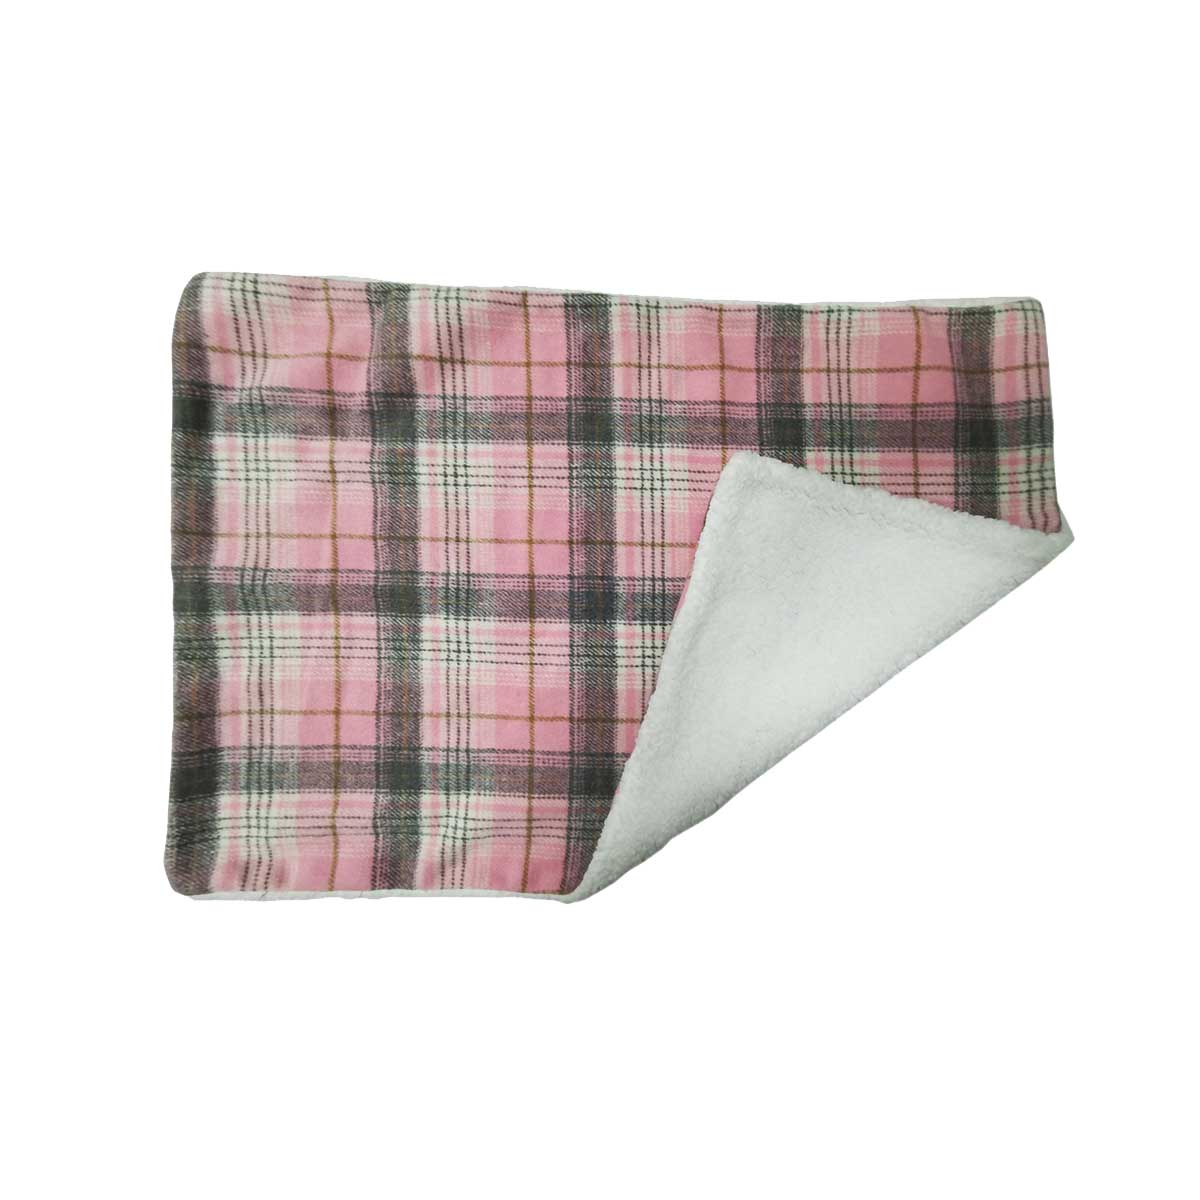 Sherpa Lined Pet Blanket in Pink & White | Pawlicious & Company